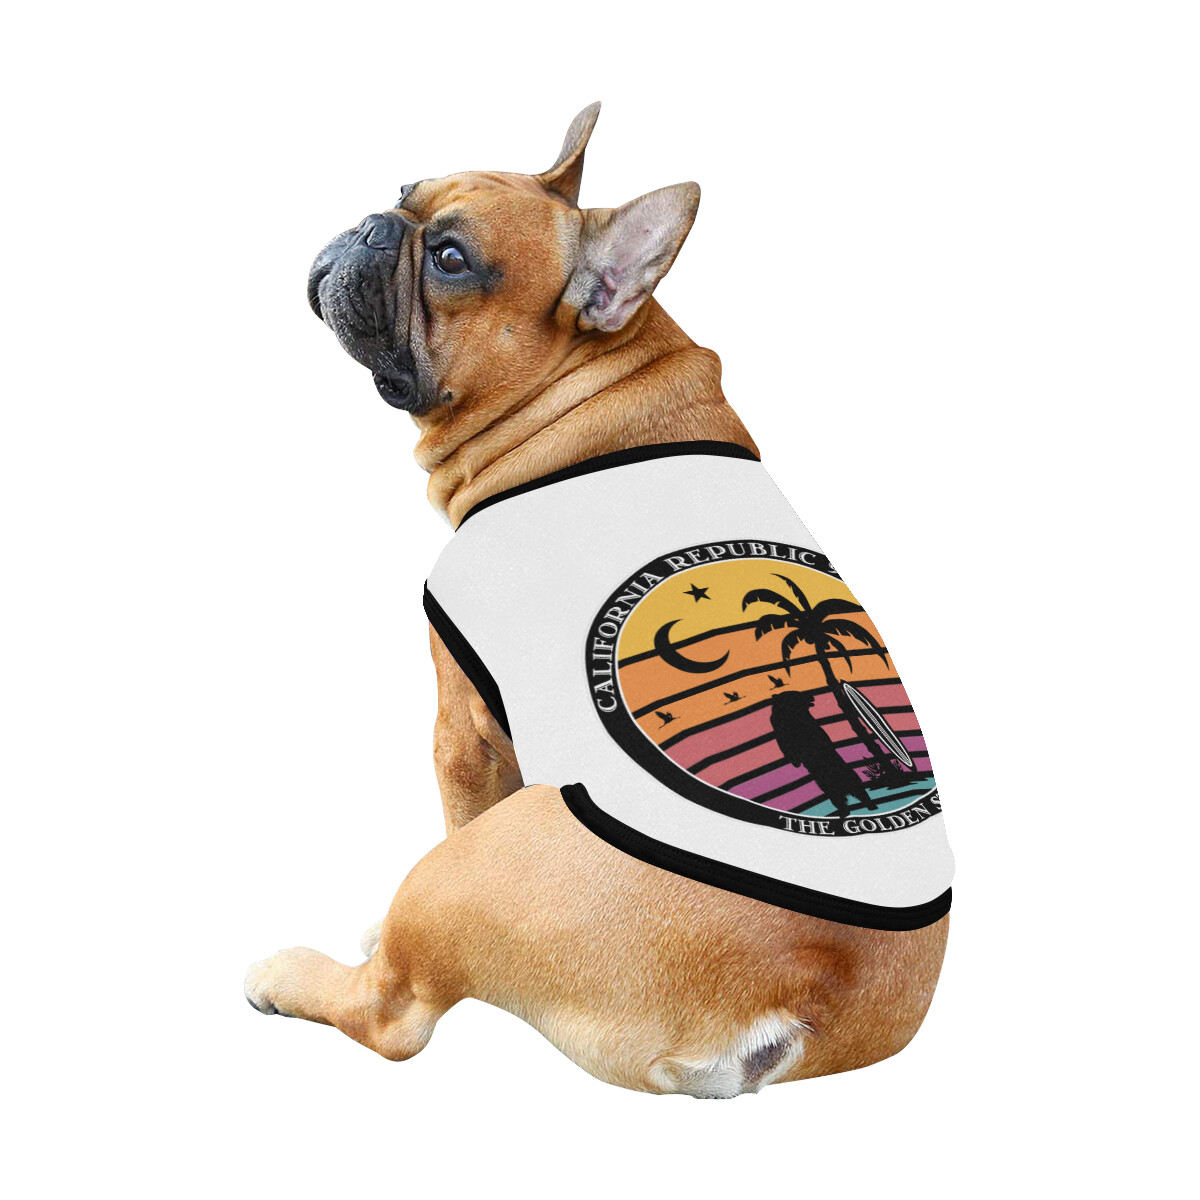 🐕 California Republic The Golden State Dog shirt, Dog Tank Top, Dog t-shirt, Dog clothes, Gifts, 7 sizes XS to 3XL, dog gifts